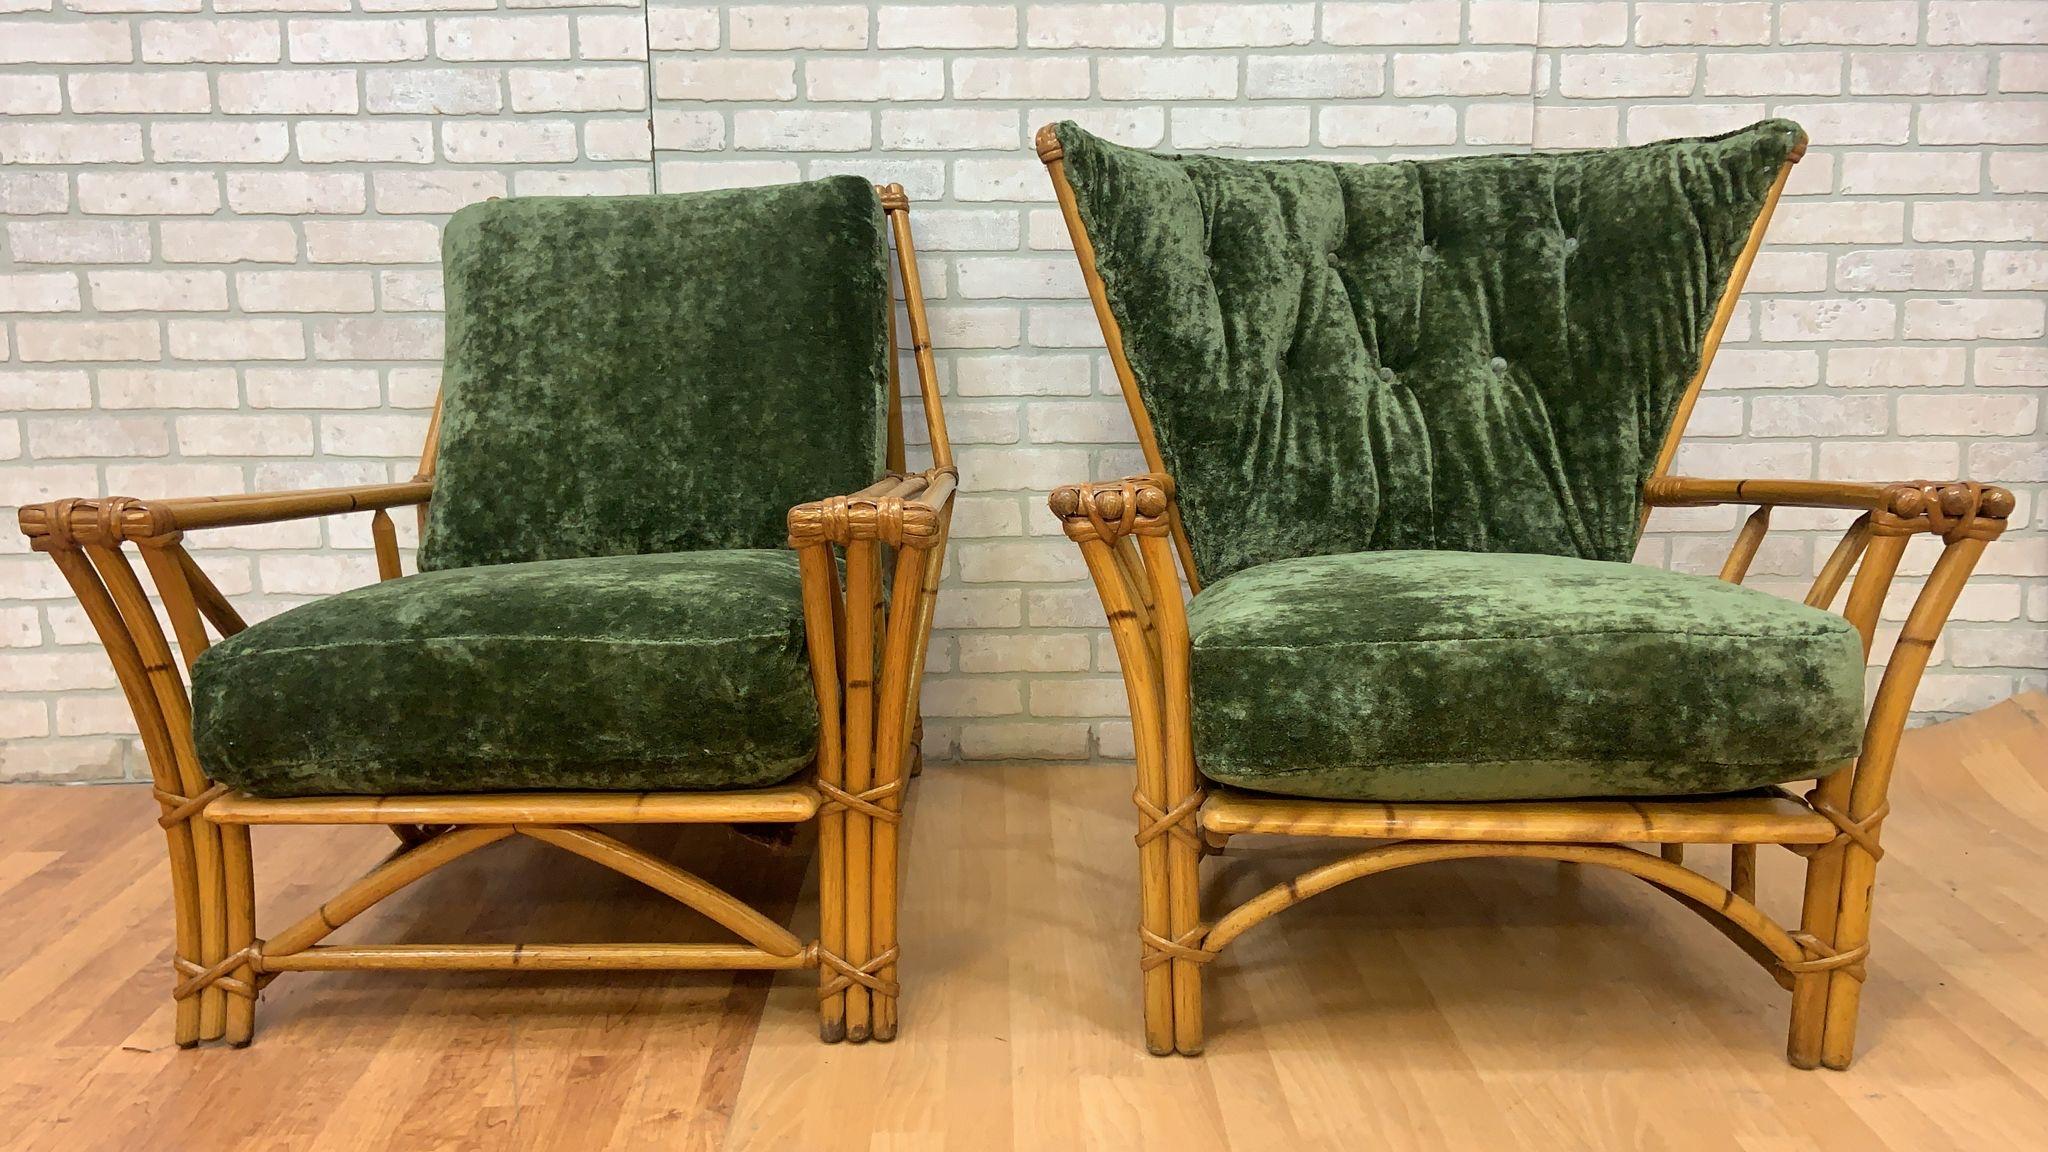 Vintage Mid Century Modern Rare Heywood Wakefield Ashcraft Rattan Lounge Chairs Newly Upholstered in a Deep Emerald Green Velvet - Set of 2 

Les chaises longues en rotin Vintage Mid Century Modern Rare Heywood Wakefield Ashcraft, récemment